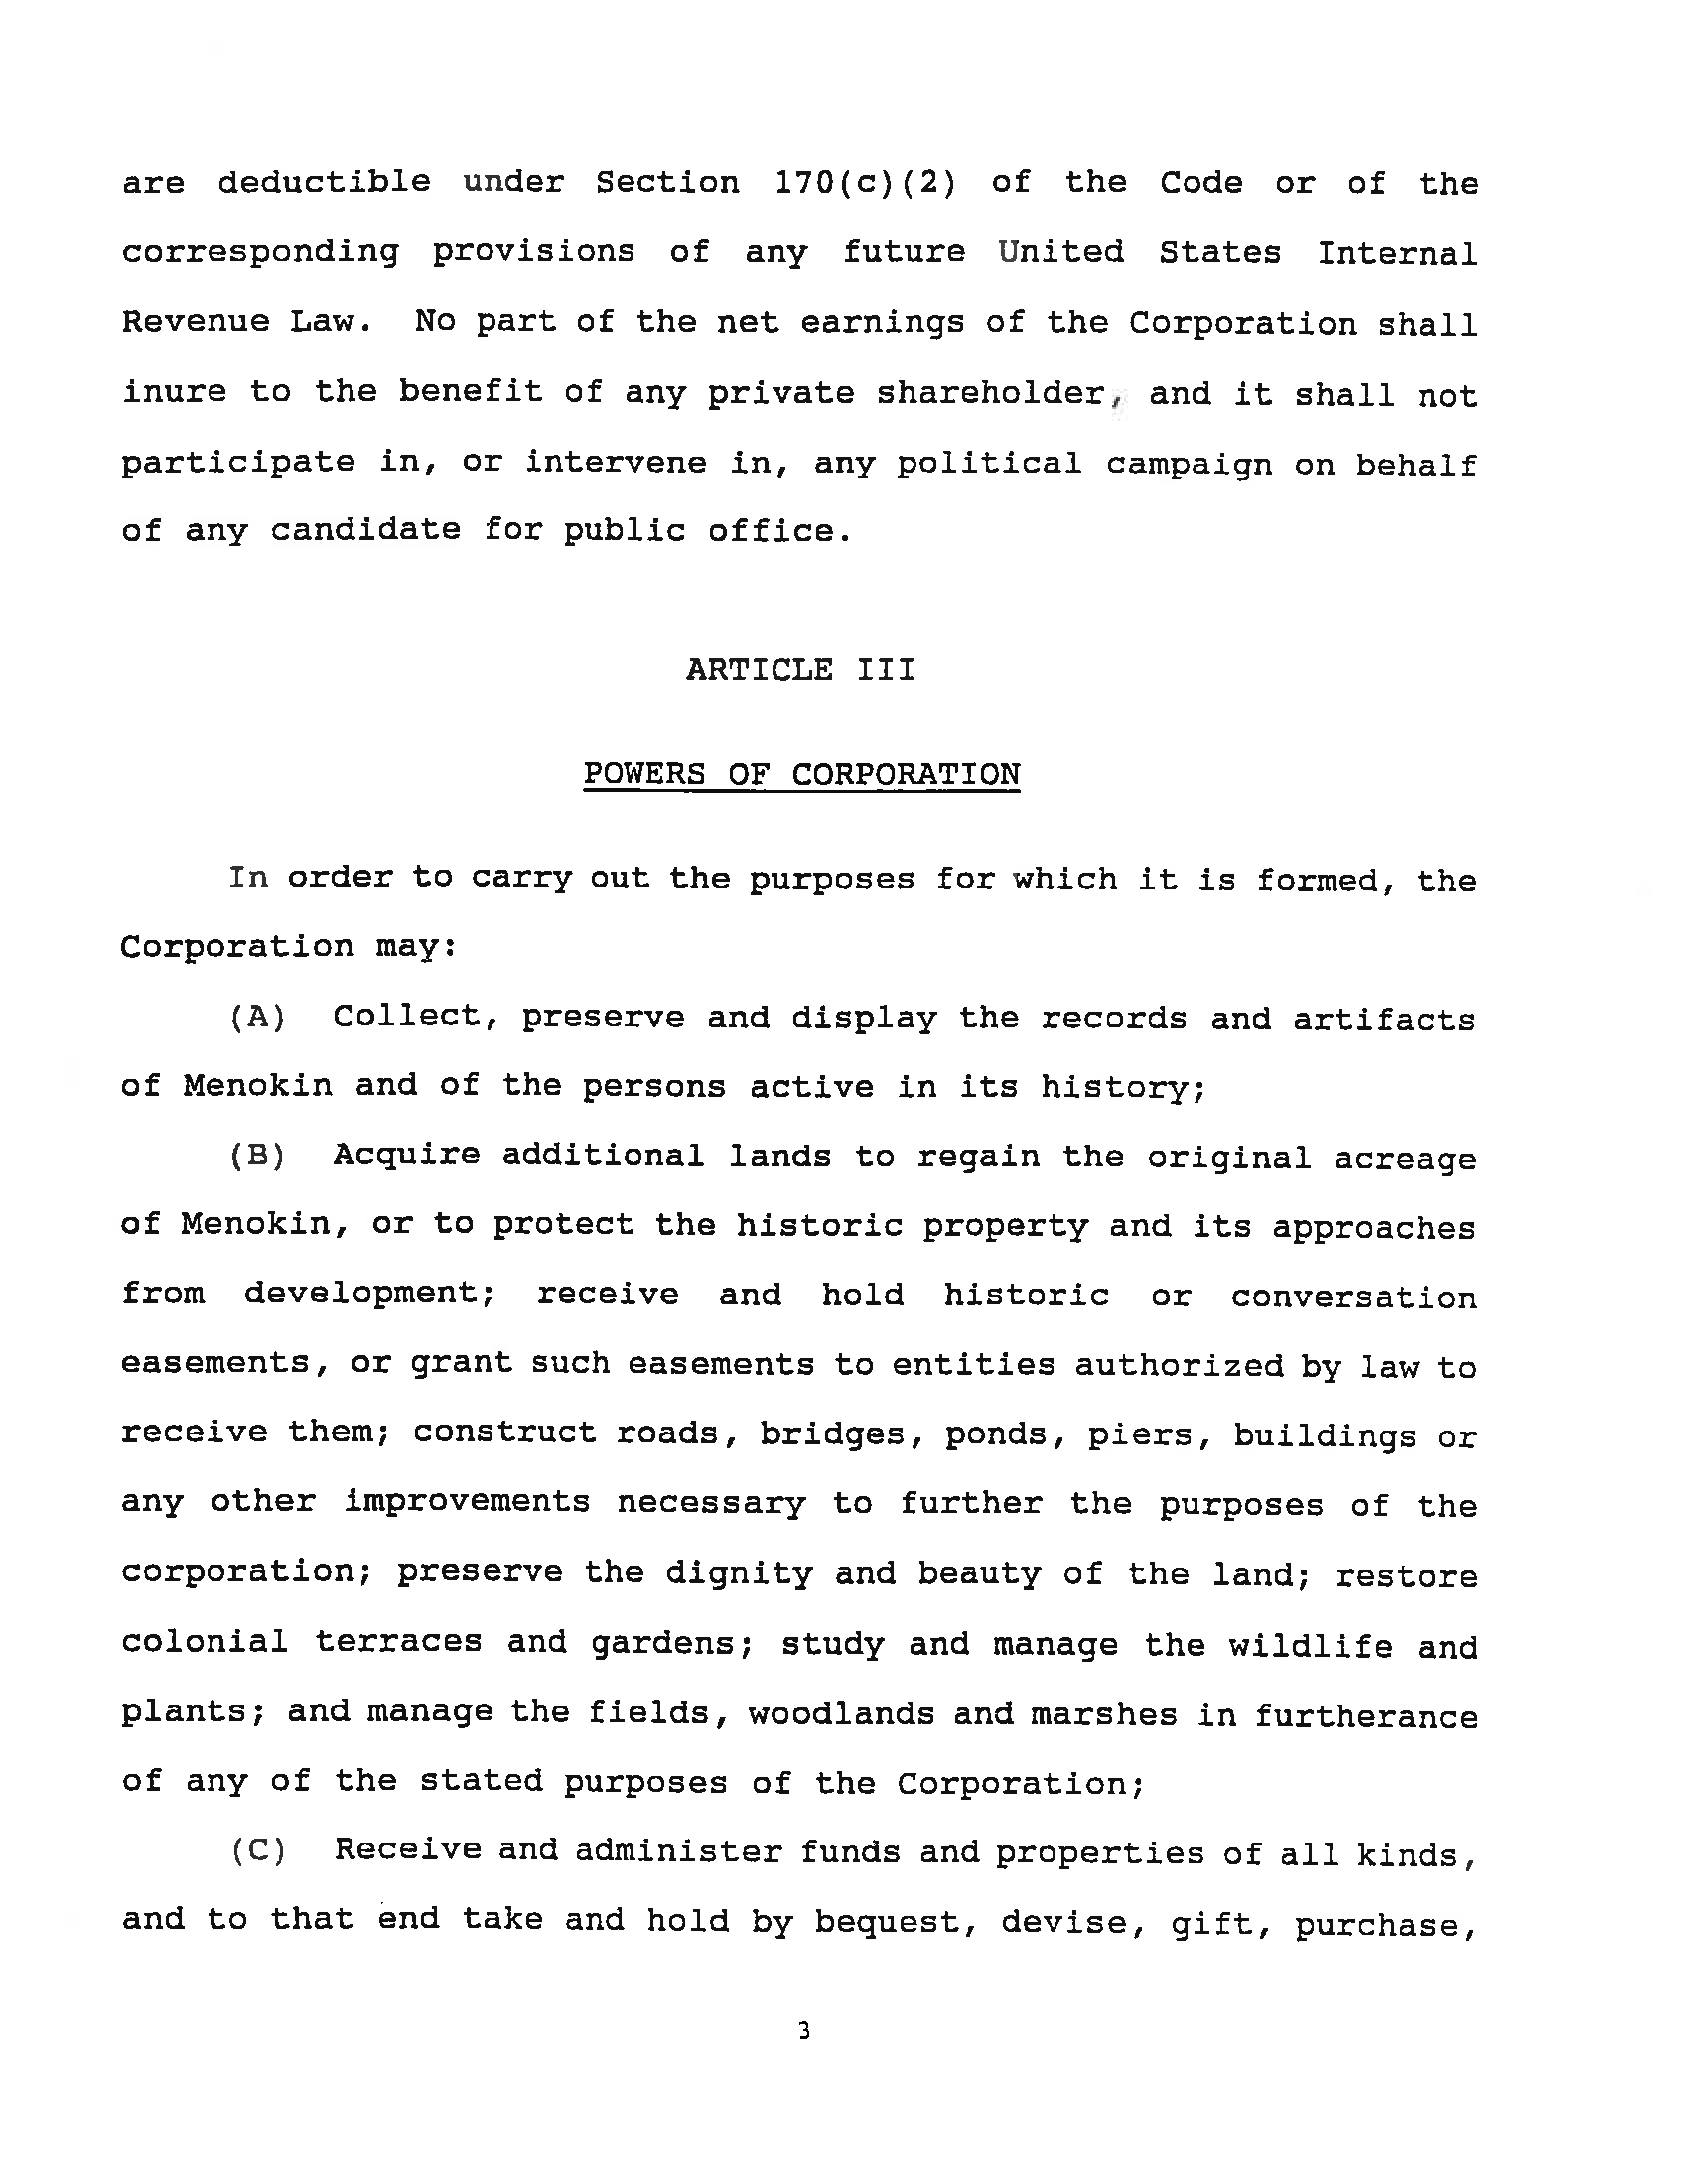 Menokin Foundation Articles of Incorporation_Page_05.png